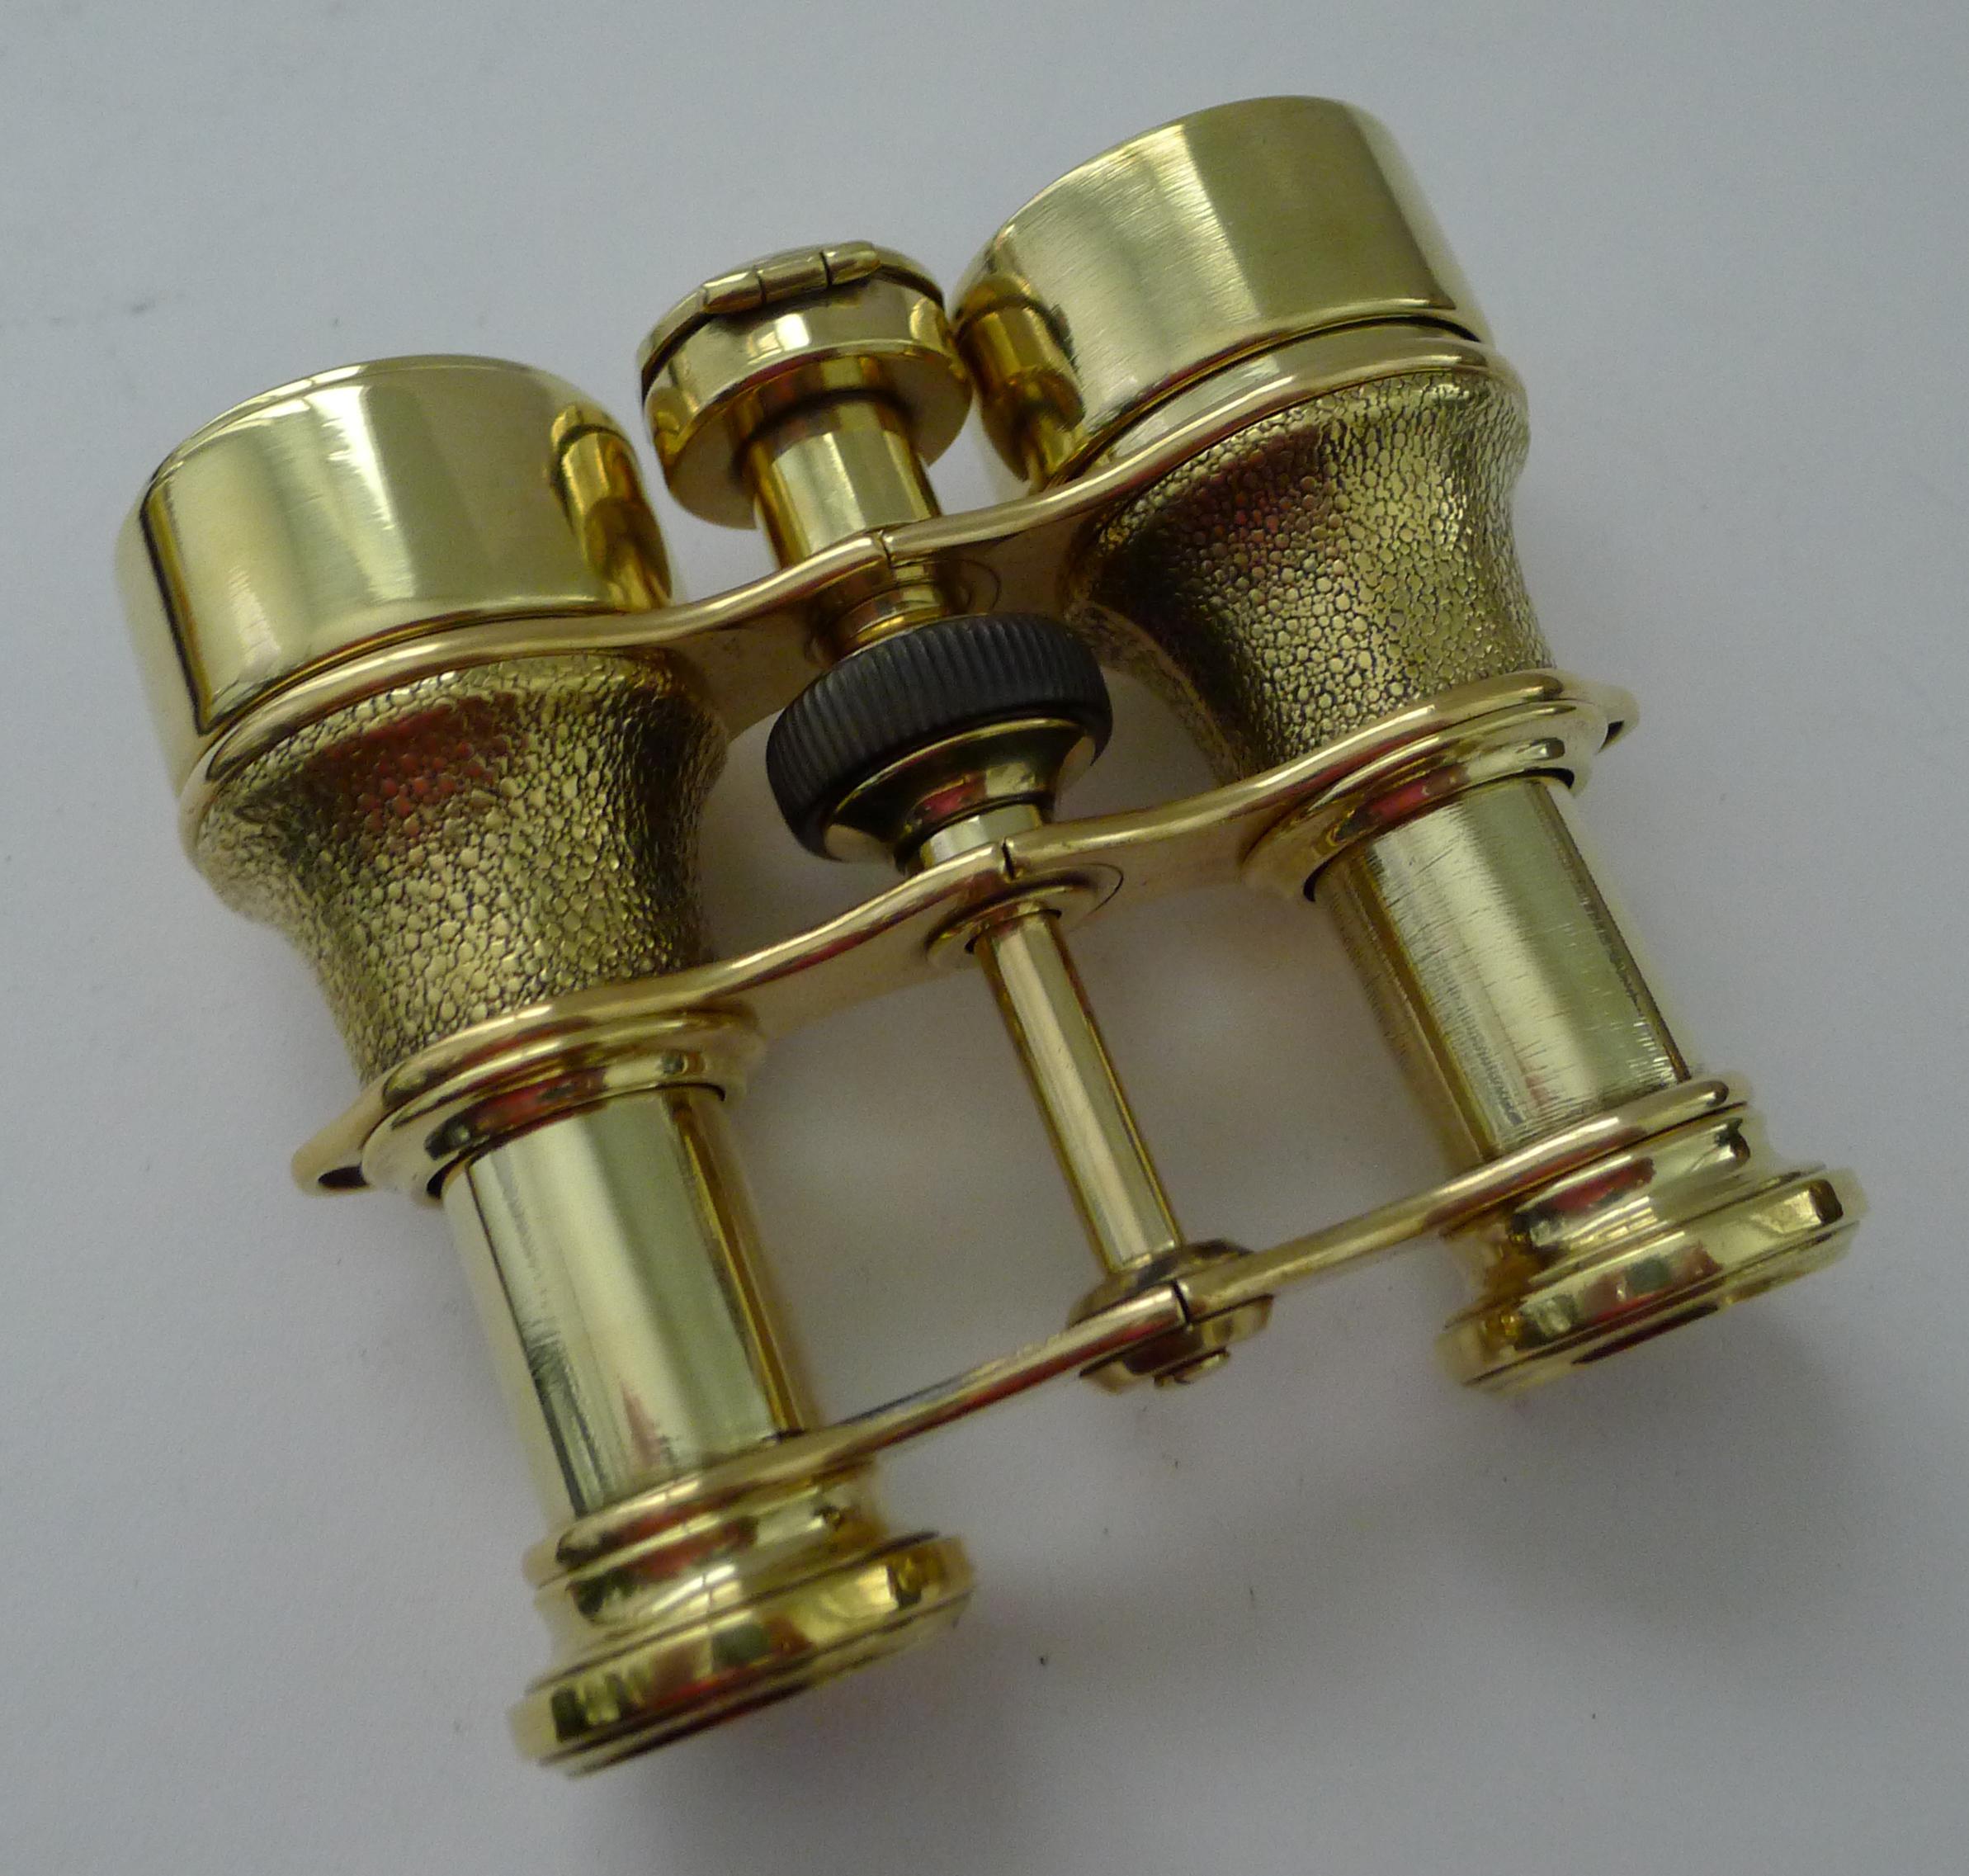 British Antique English Field Glasses / Binoculars by Lawrence and Mayo - With Compass For Sale